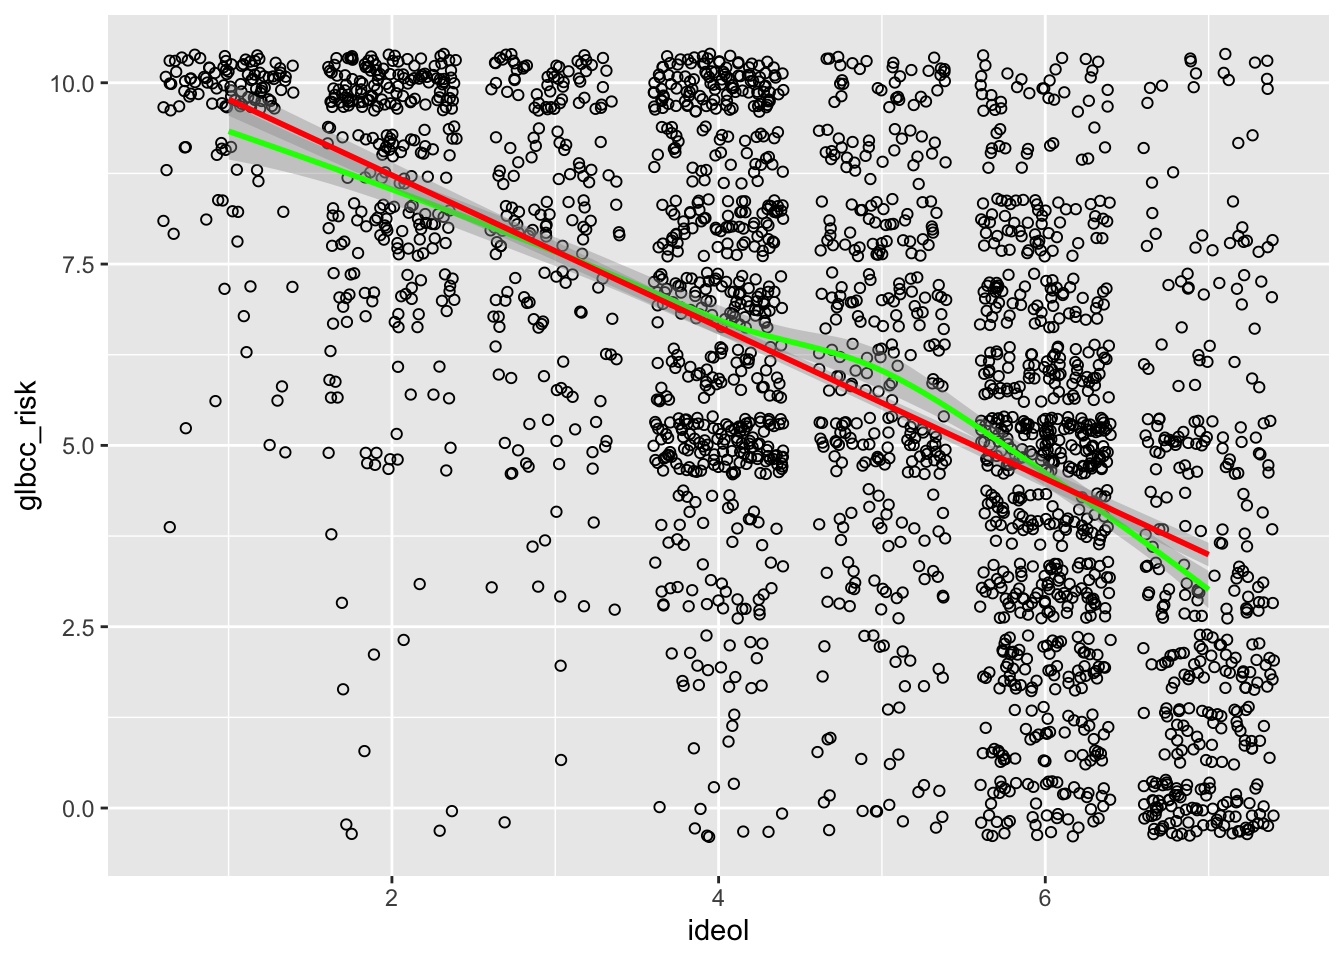 Scatterplot of Ideology and GLBCC Risk with Regression Line and Lowess Line